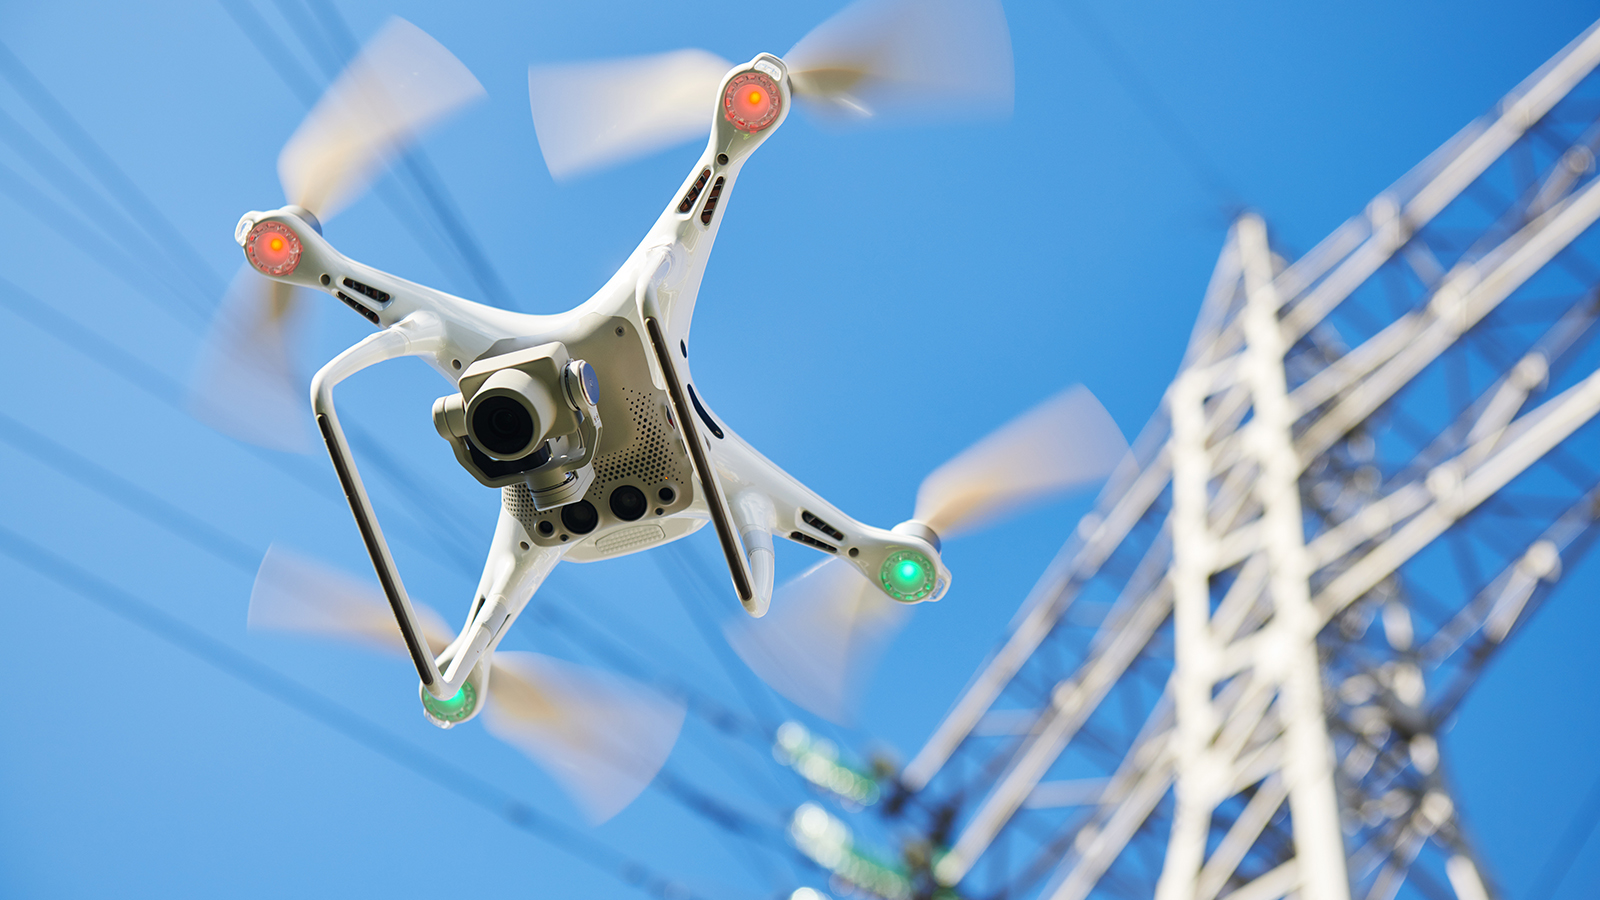 Autonomous drones monitoring electrical grids|Up to 100 drones monitor Hamburg Harbor